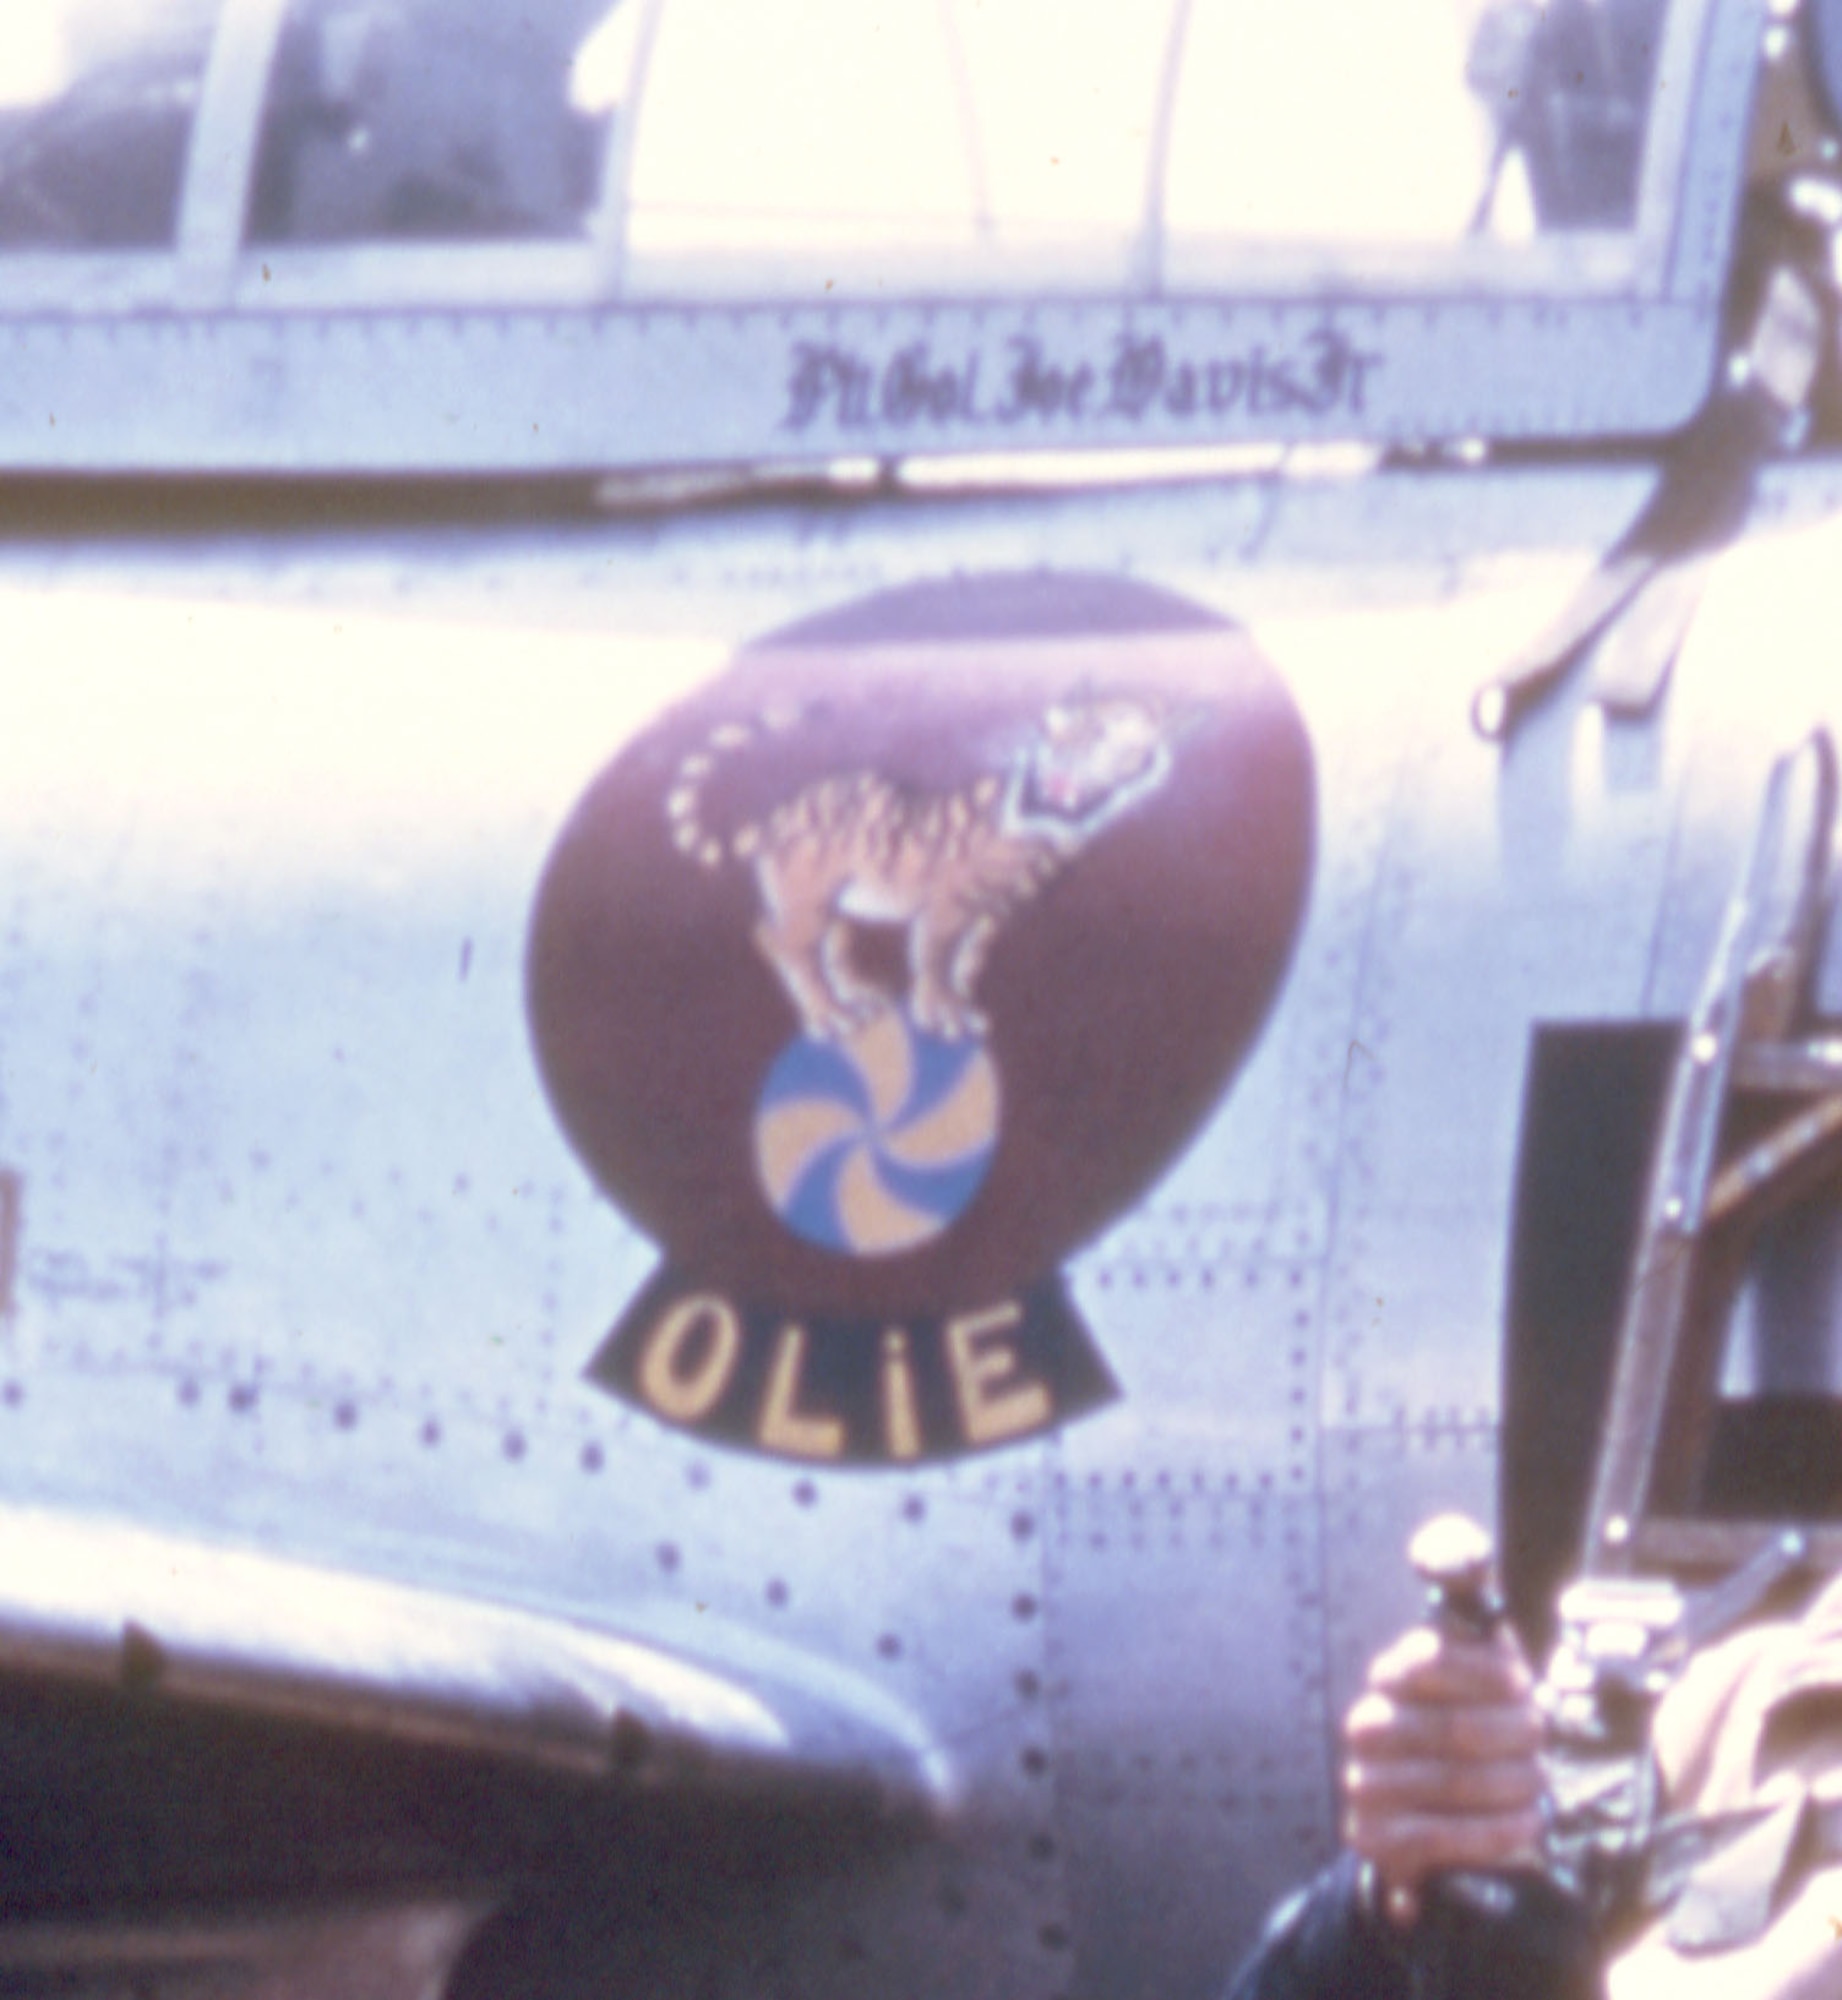 430th Fighter-Bomber Squadron emblem on the right side of Col. Davis’ F-84. (U.S. Air Force photo)